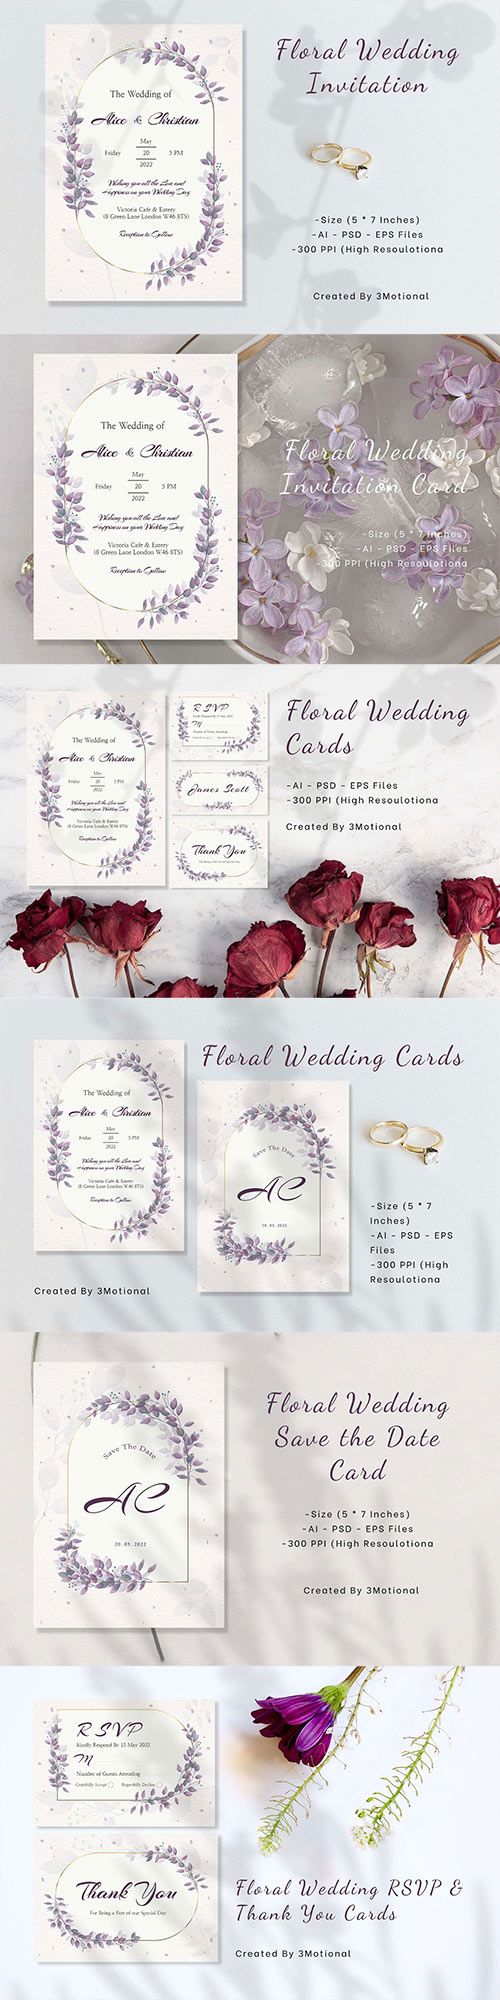 Floral Wedding Cards Templates 10185454